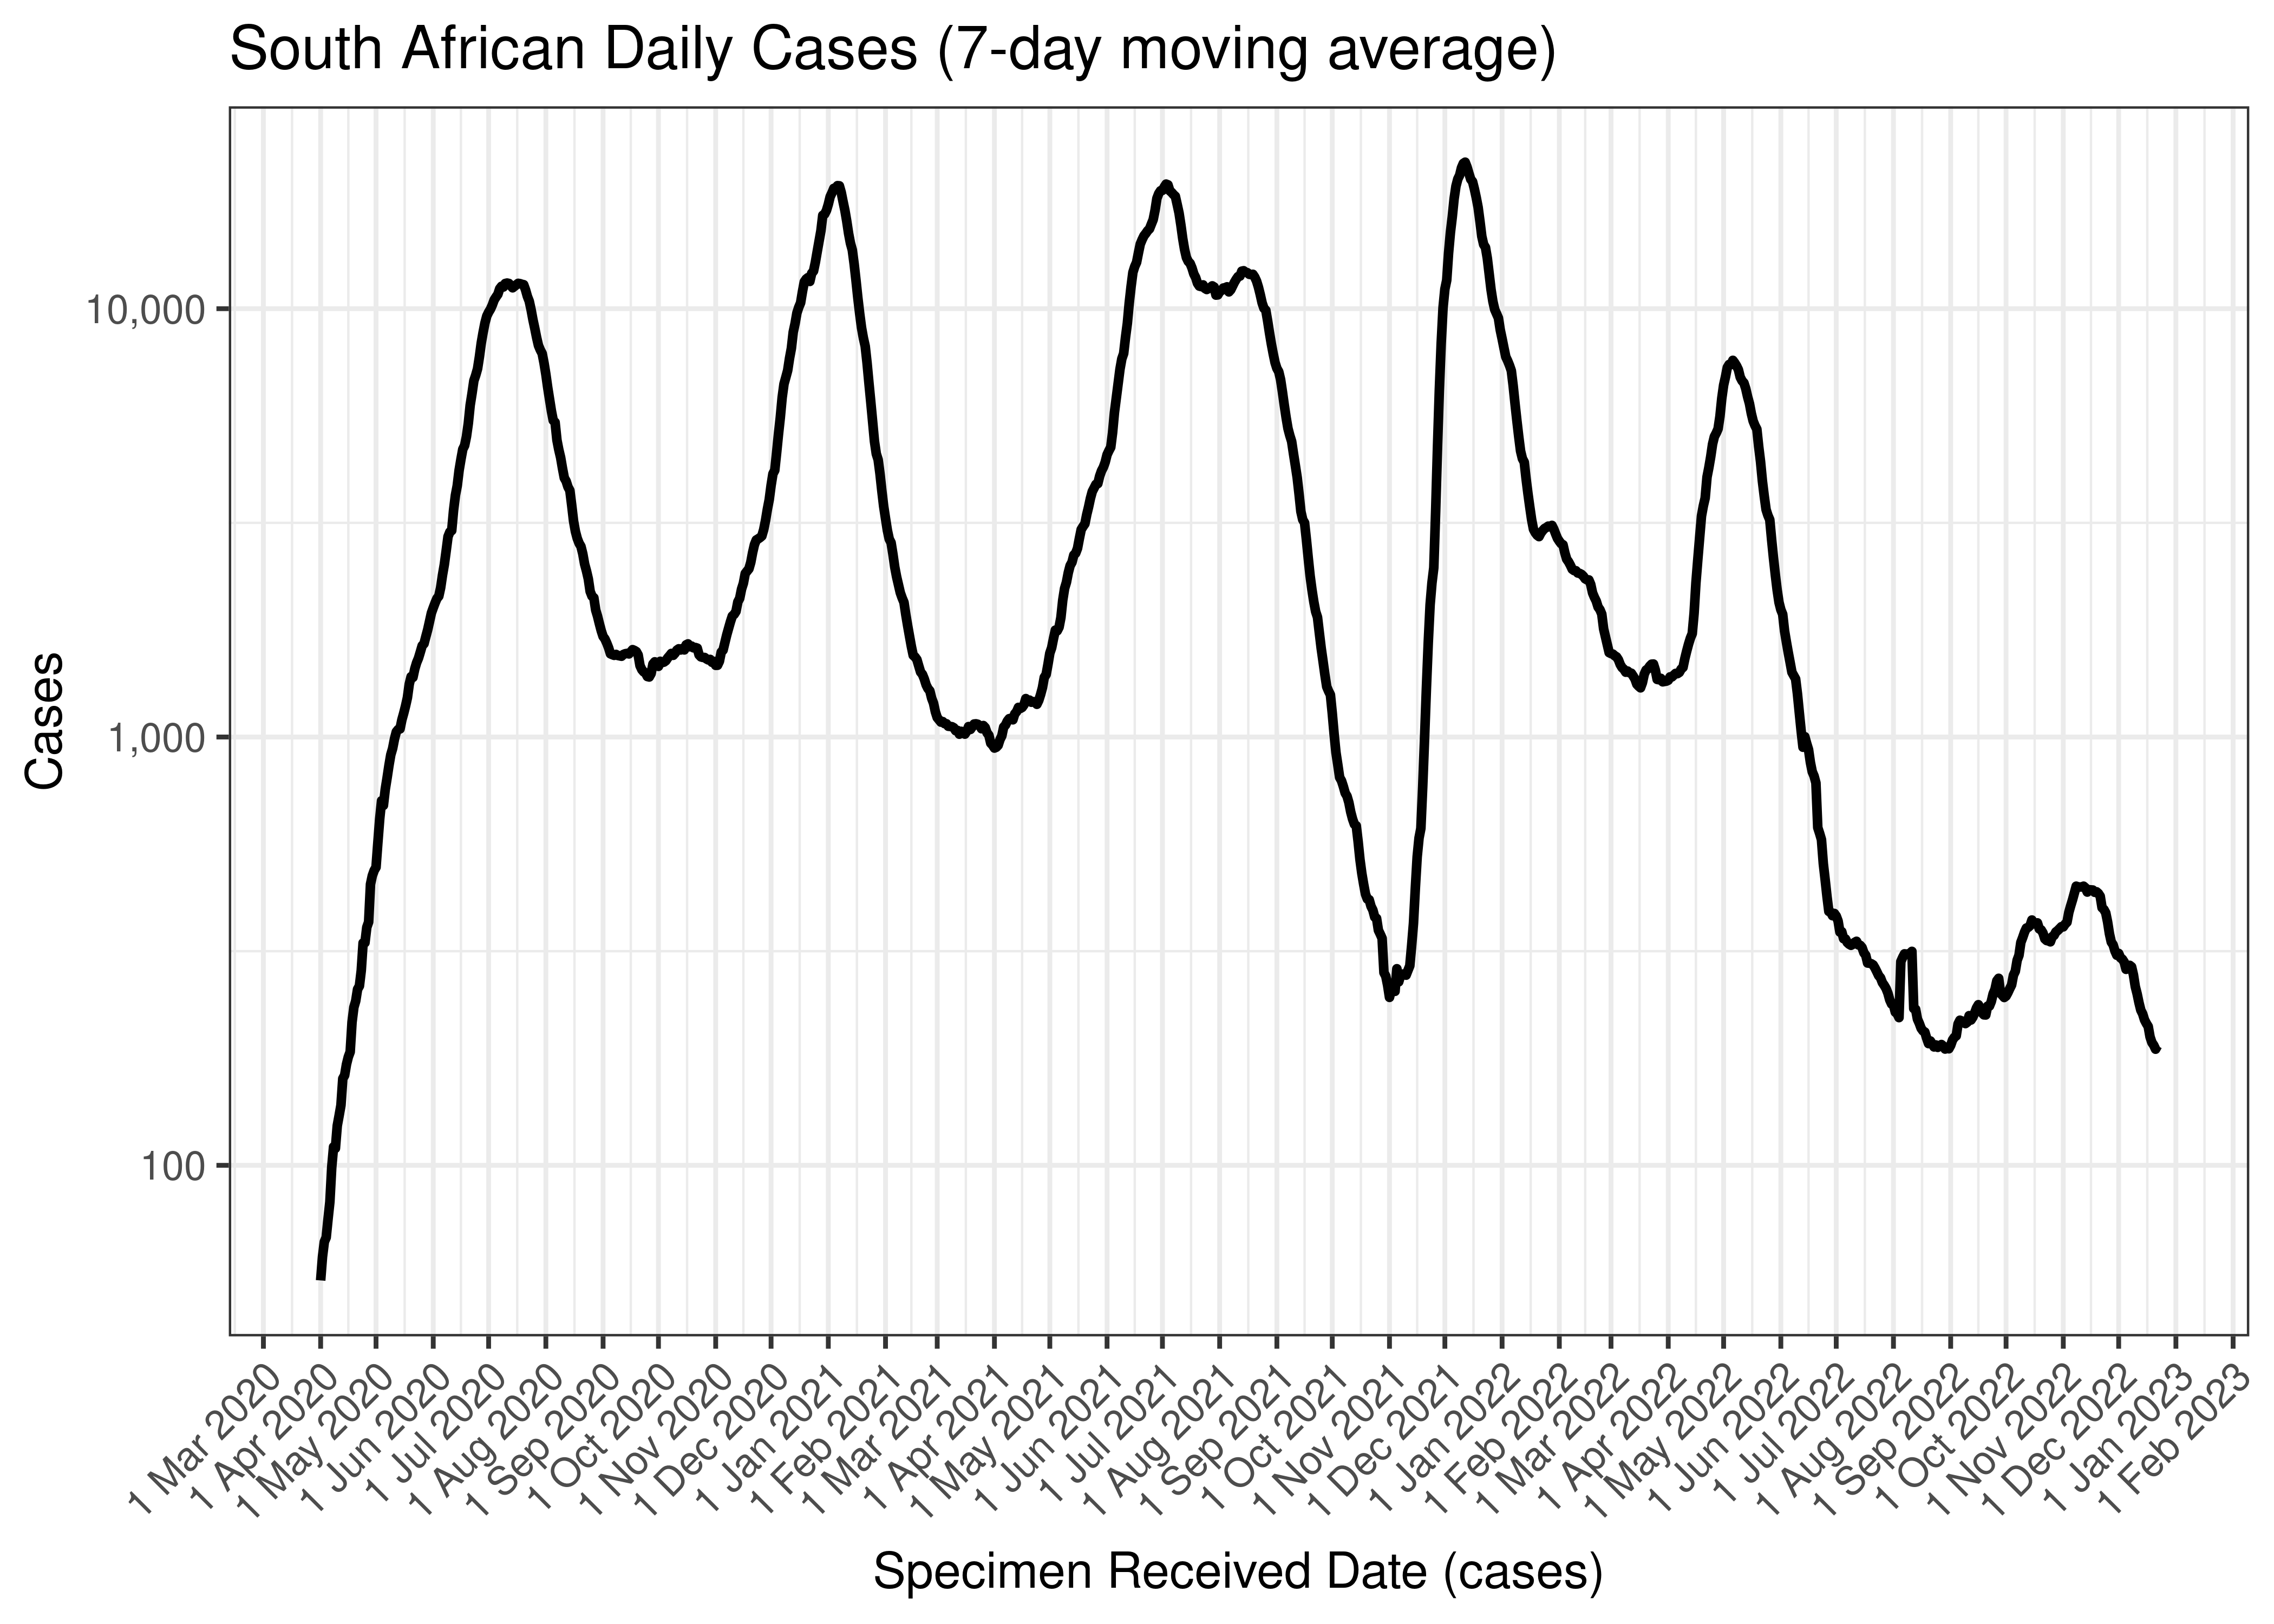 South African Daily Cases (7-day moving average)